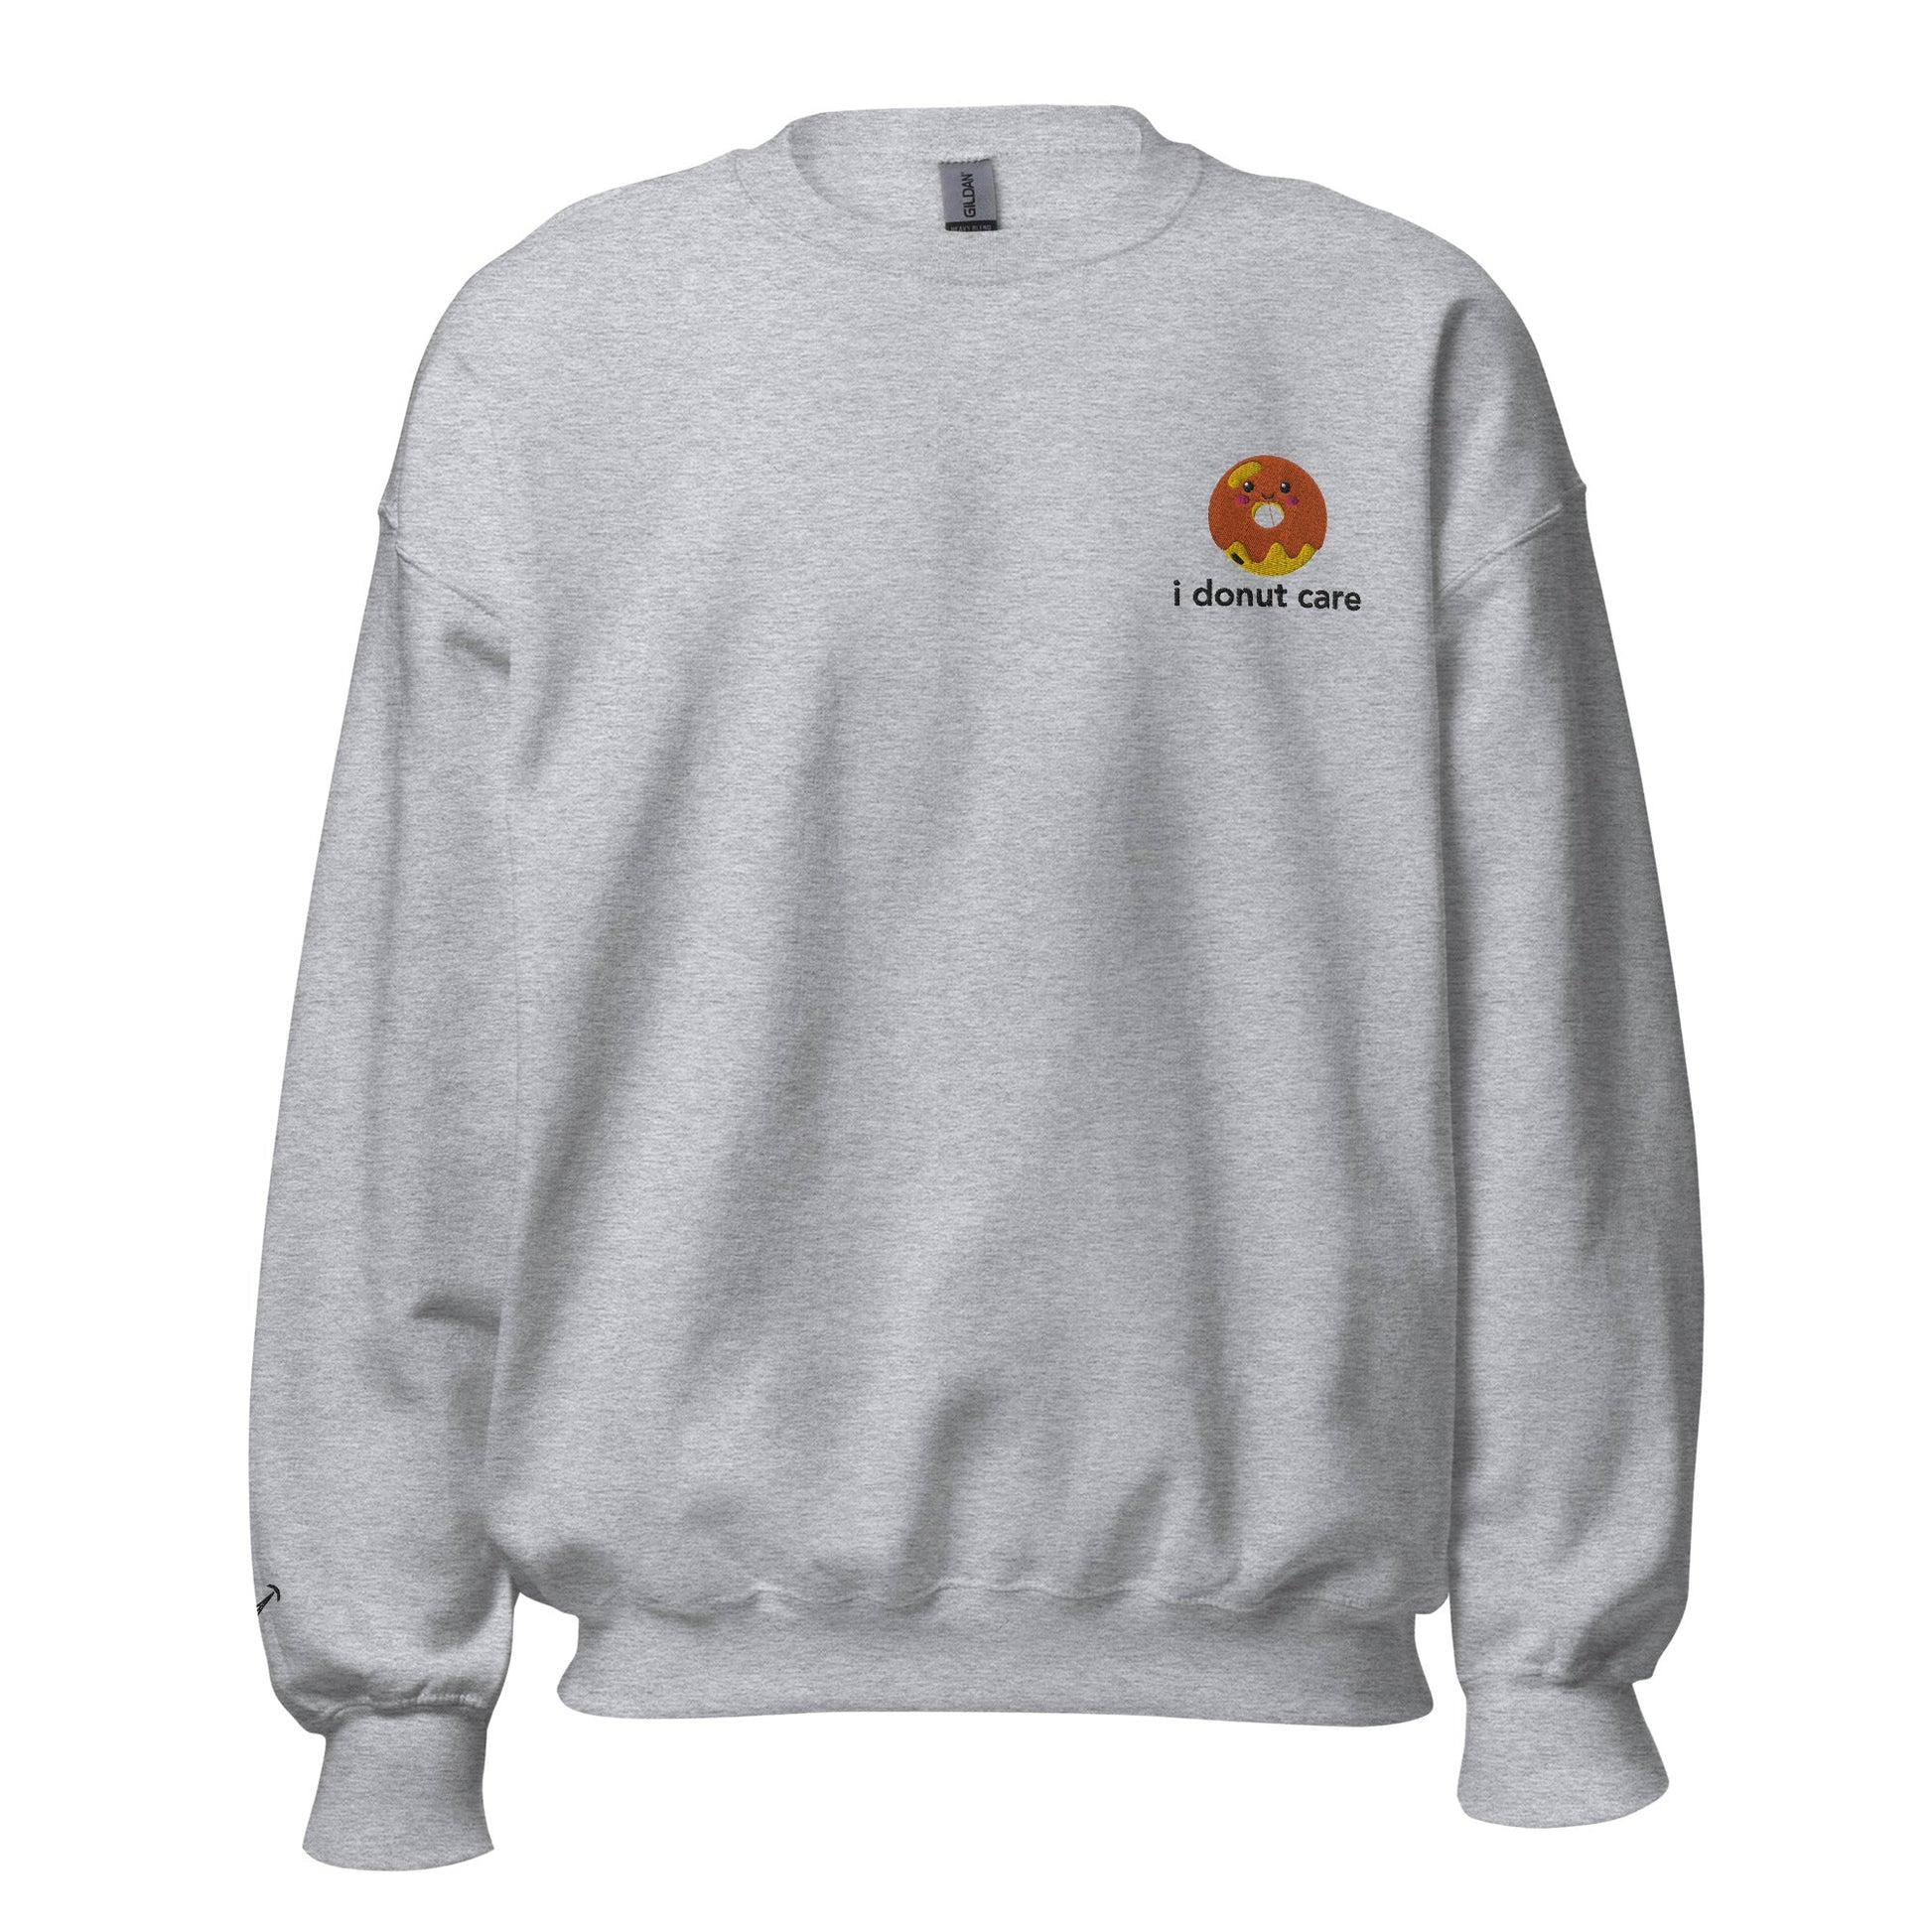 I Donut Care Embroidered Unisex Sweatshirt - chucklecouture co.